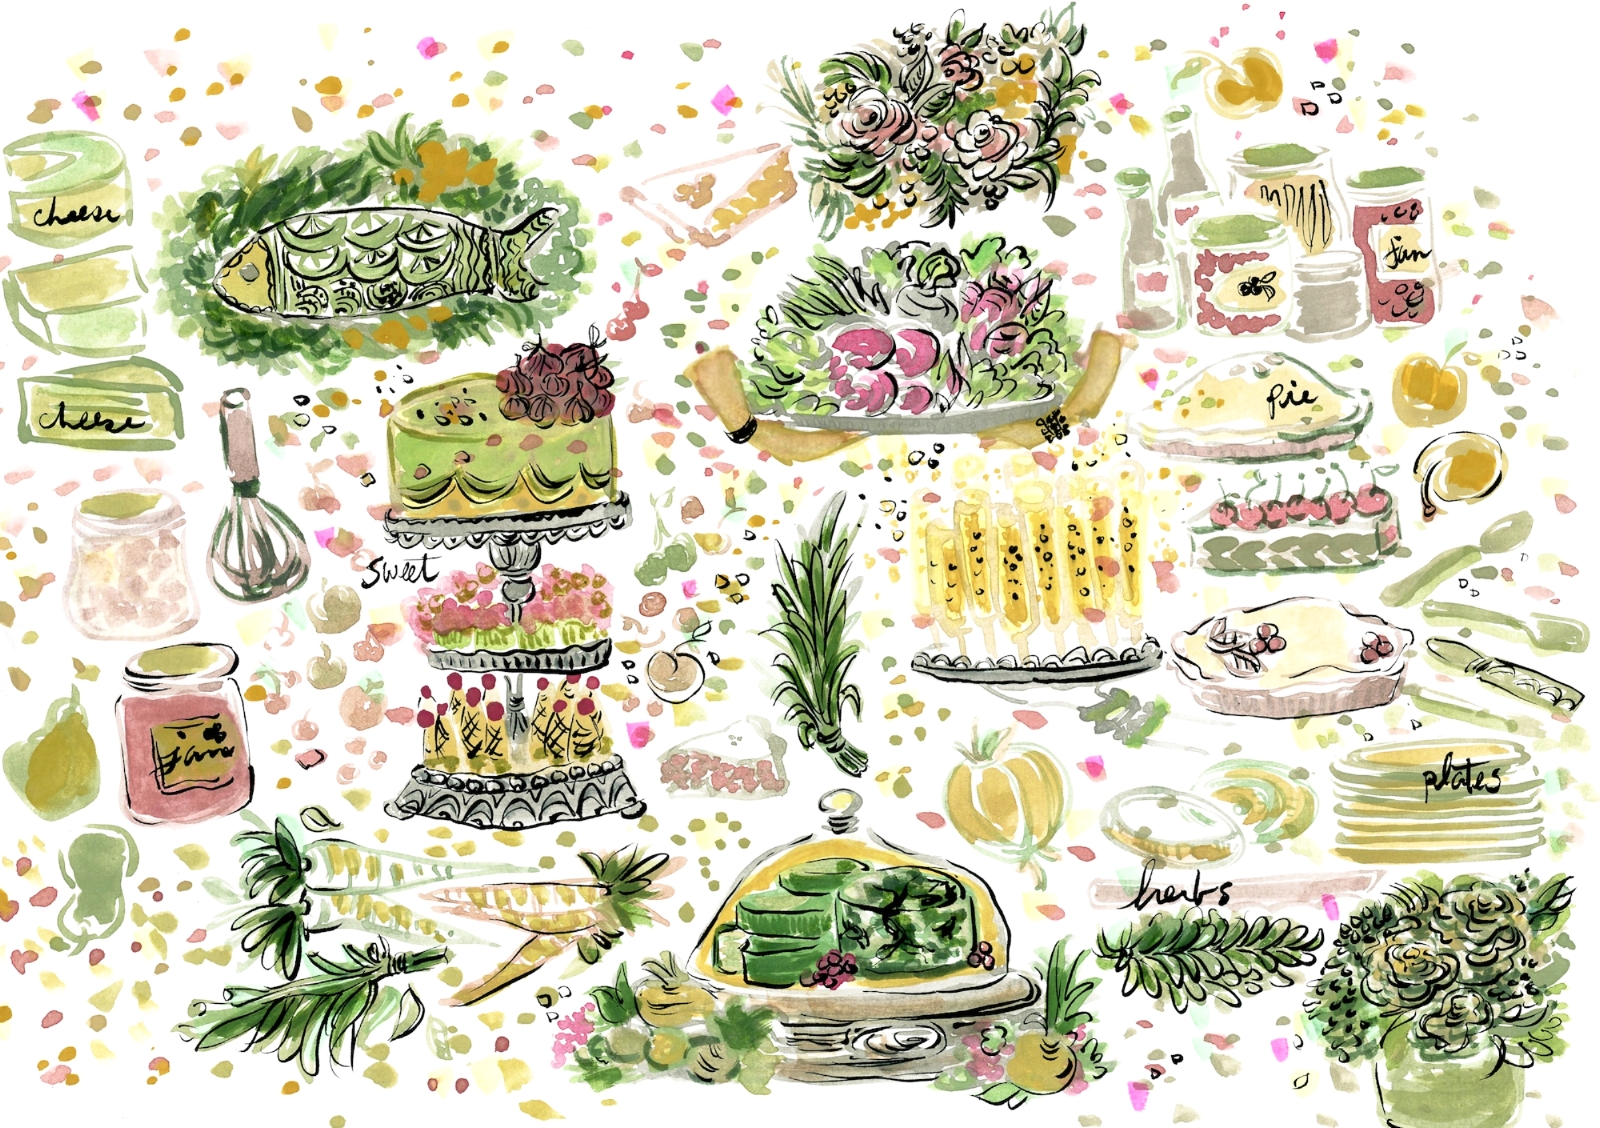  Website illustrations for cookbook author   Cathy Barrow   